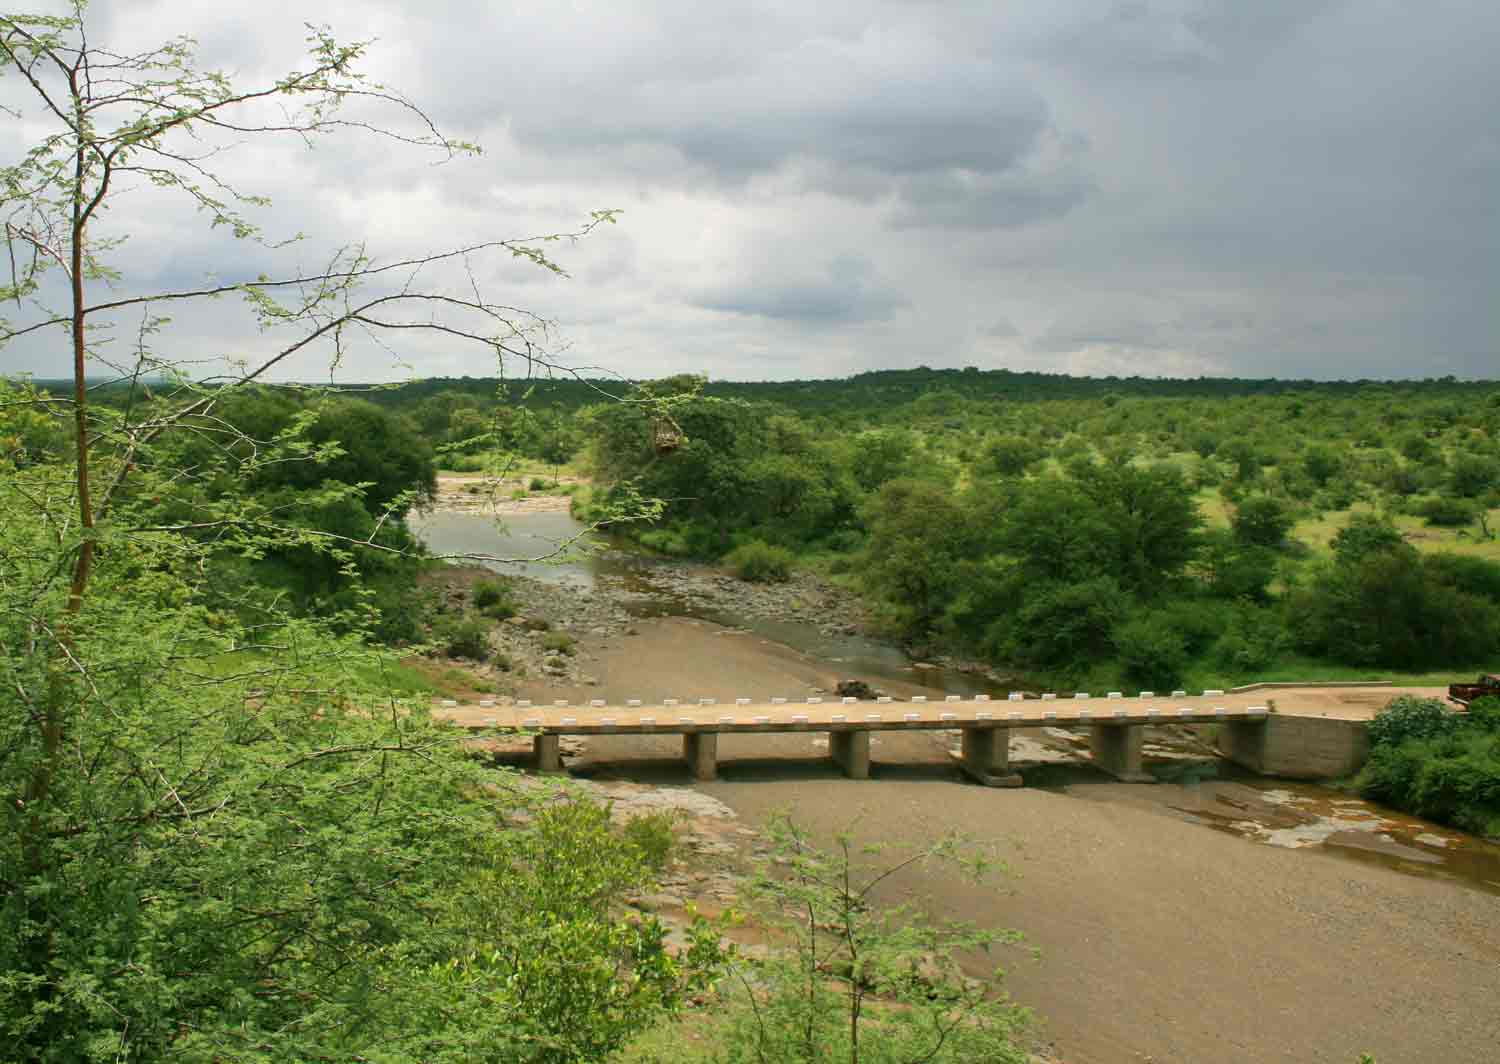 Bridge over the Hwale River, a tributary of the Shashe.